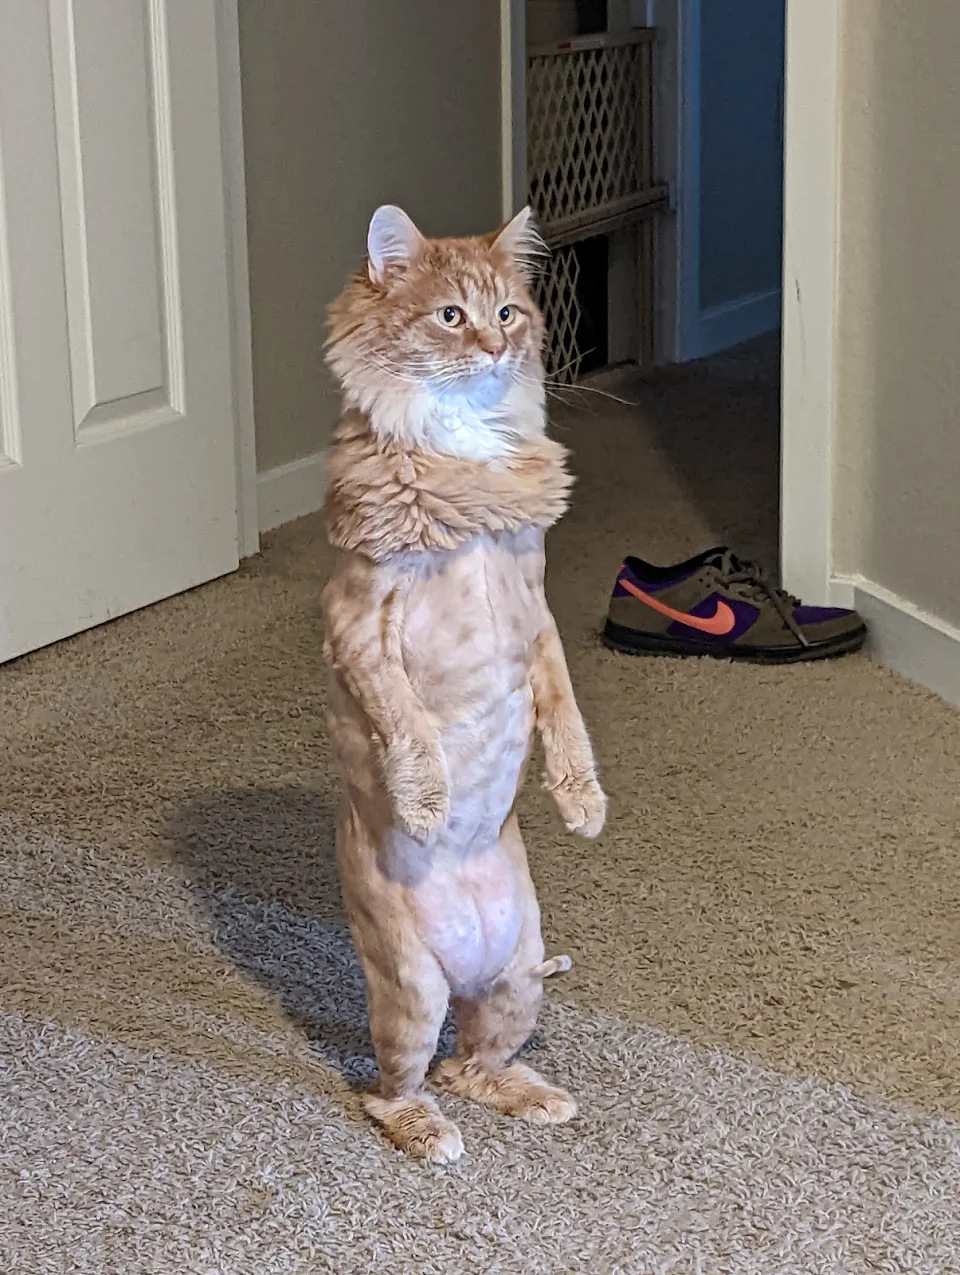 My Cat stands up, when he hears bell noises.